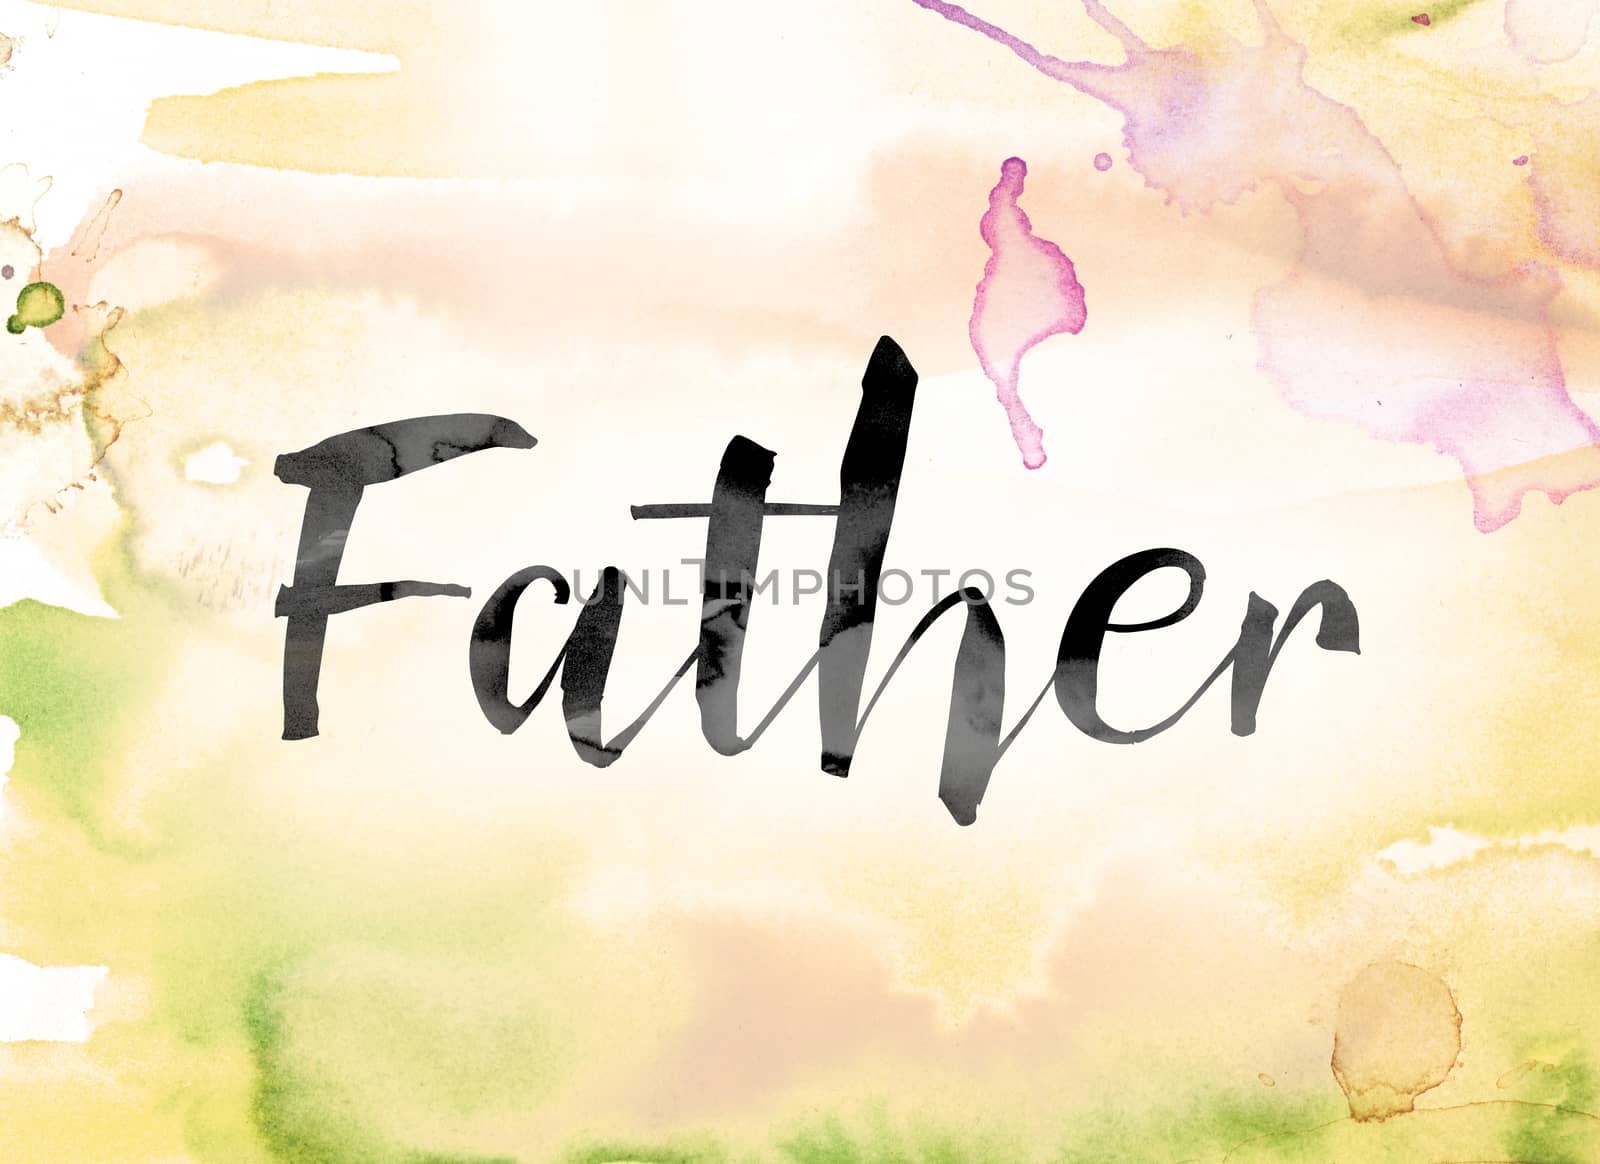 The word "Father" painted in black ink over a colorful watercolor washed background concept and theme.